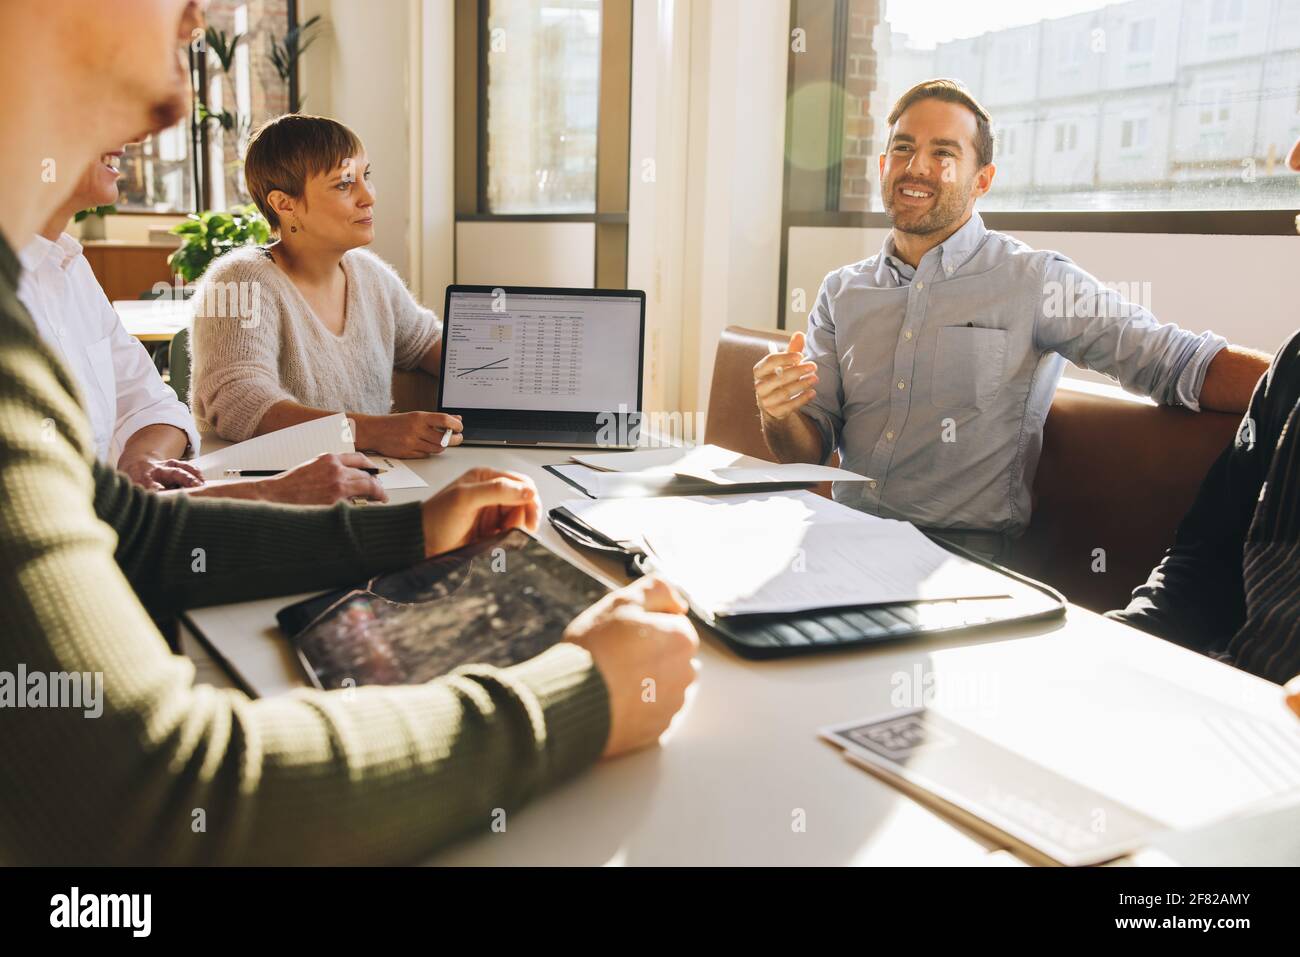 Man giving suggestions in business meeting. Male executive speaking in team meeting. Stock Photo